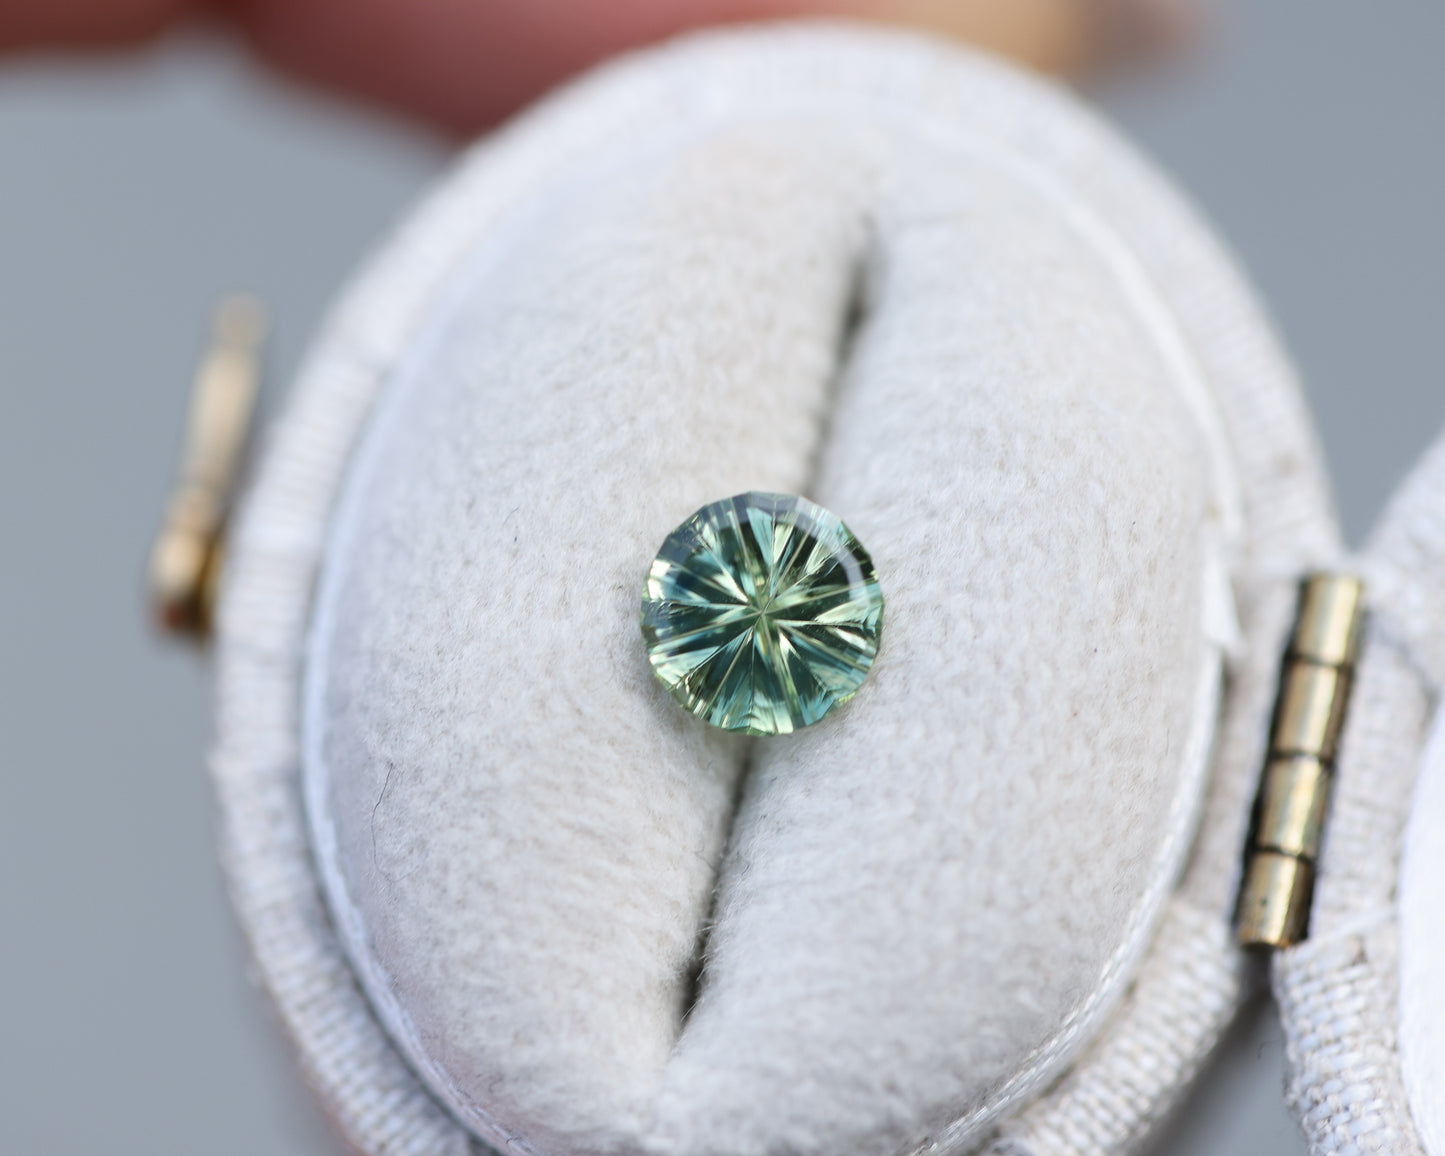 .71ct round teal green sapphire- Starbrite cut by John Dyer